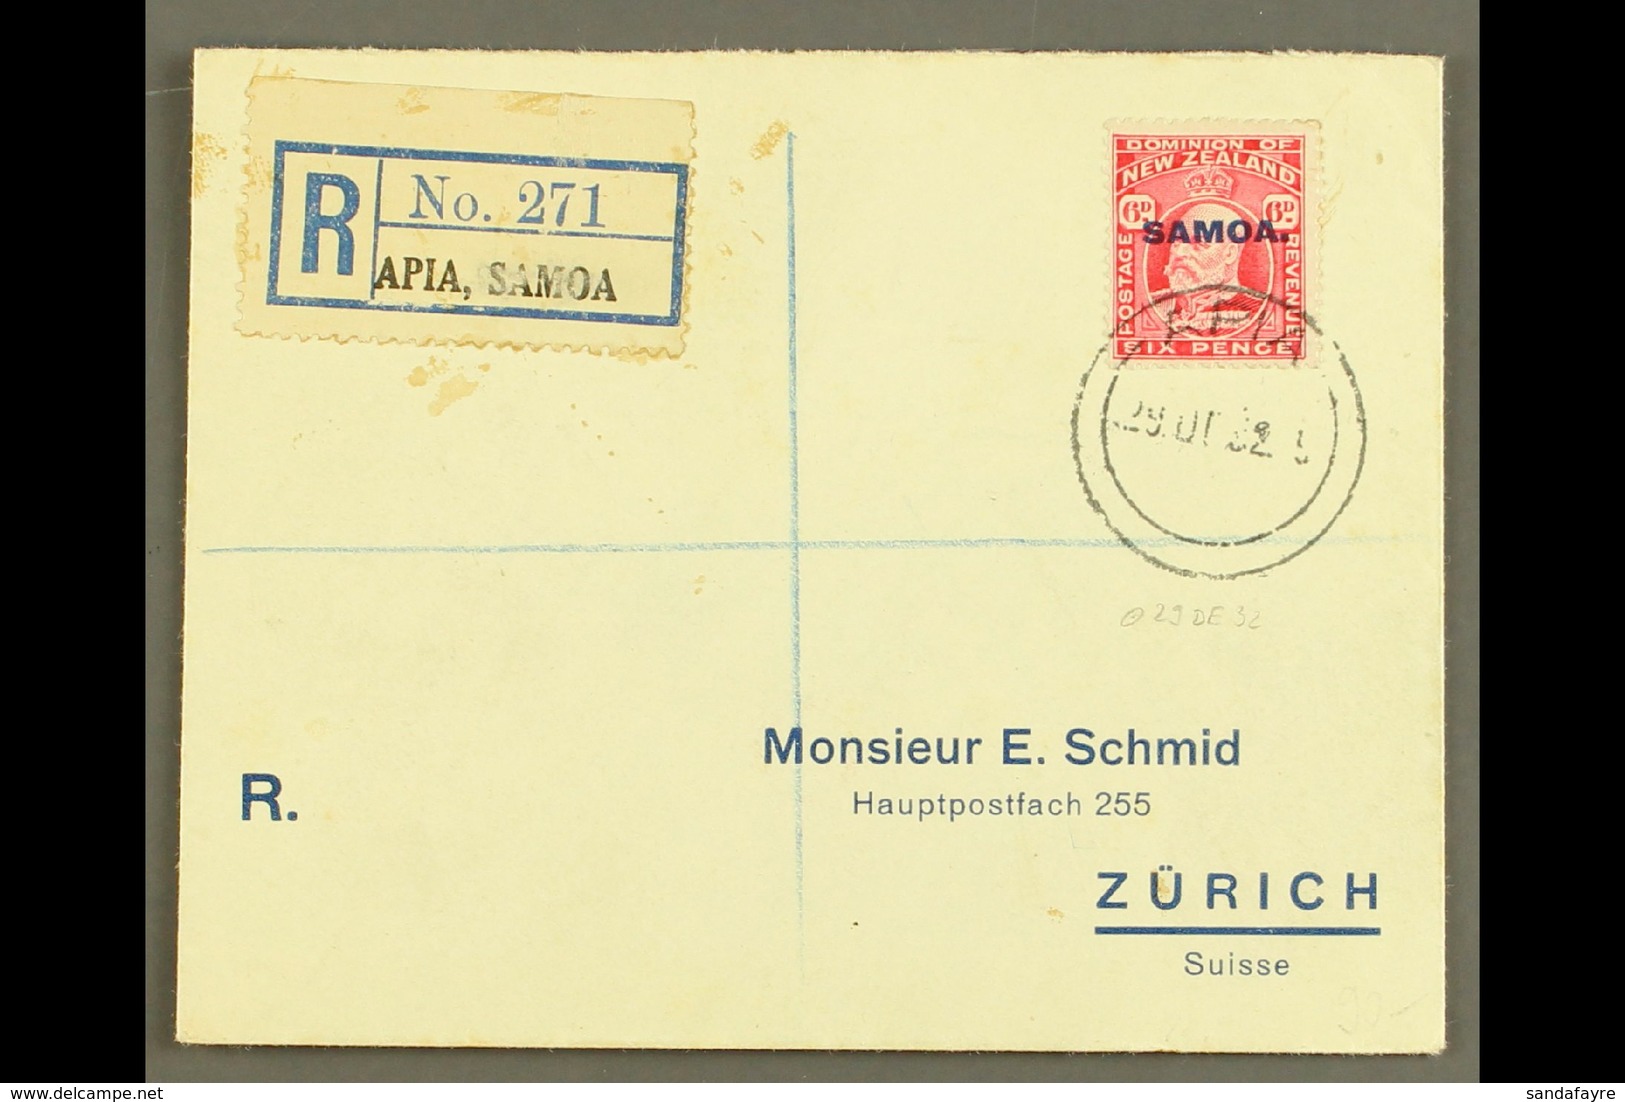 1932  6d Carmine, SG 119, Single Franking On Neat Printed, Registered Envelope To Switzerland, Tied By Apia 29.12.32 Pos - Samoa